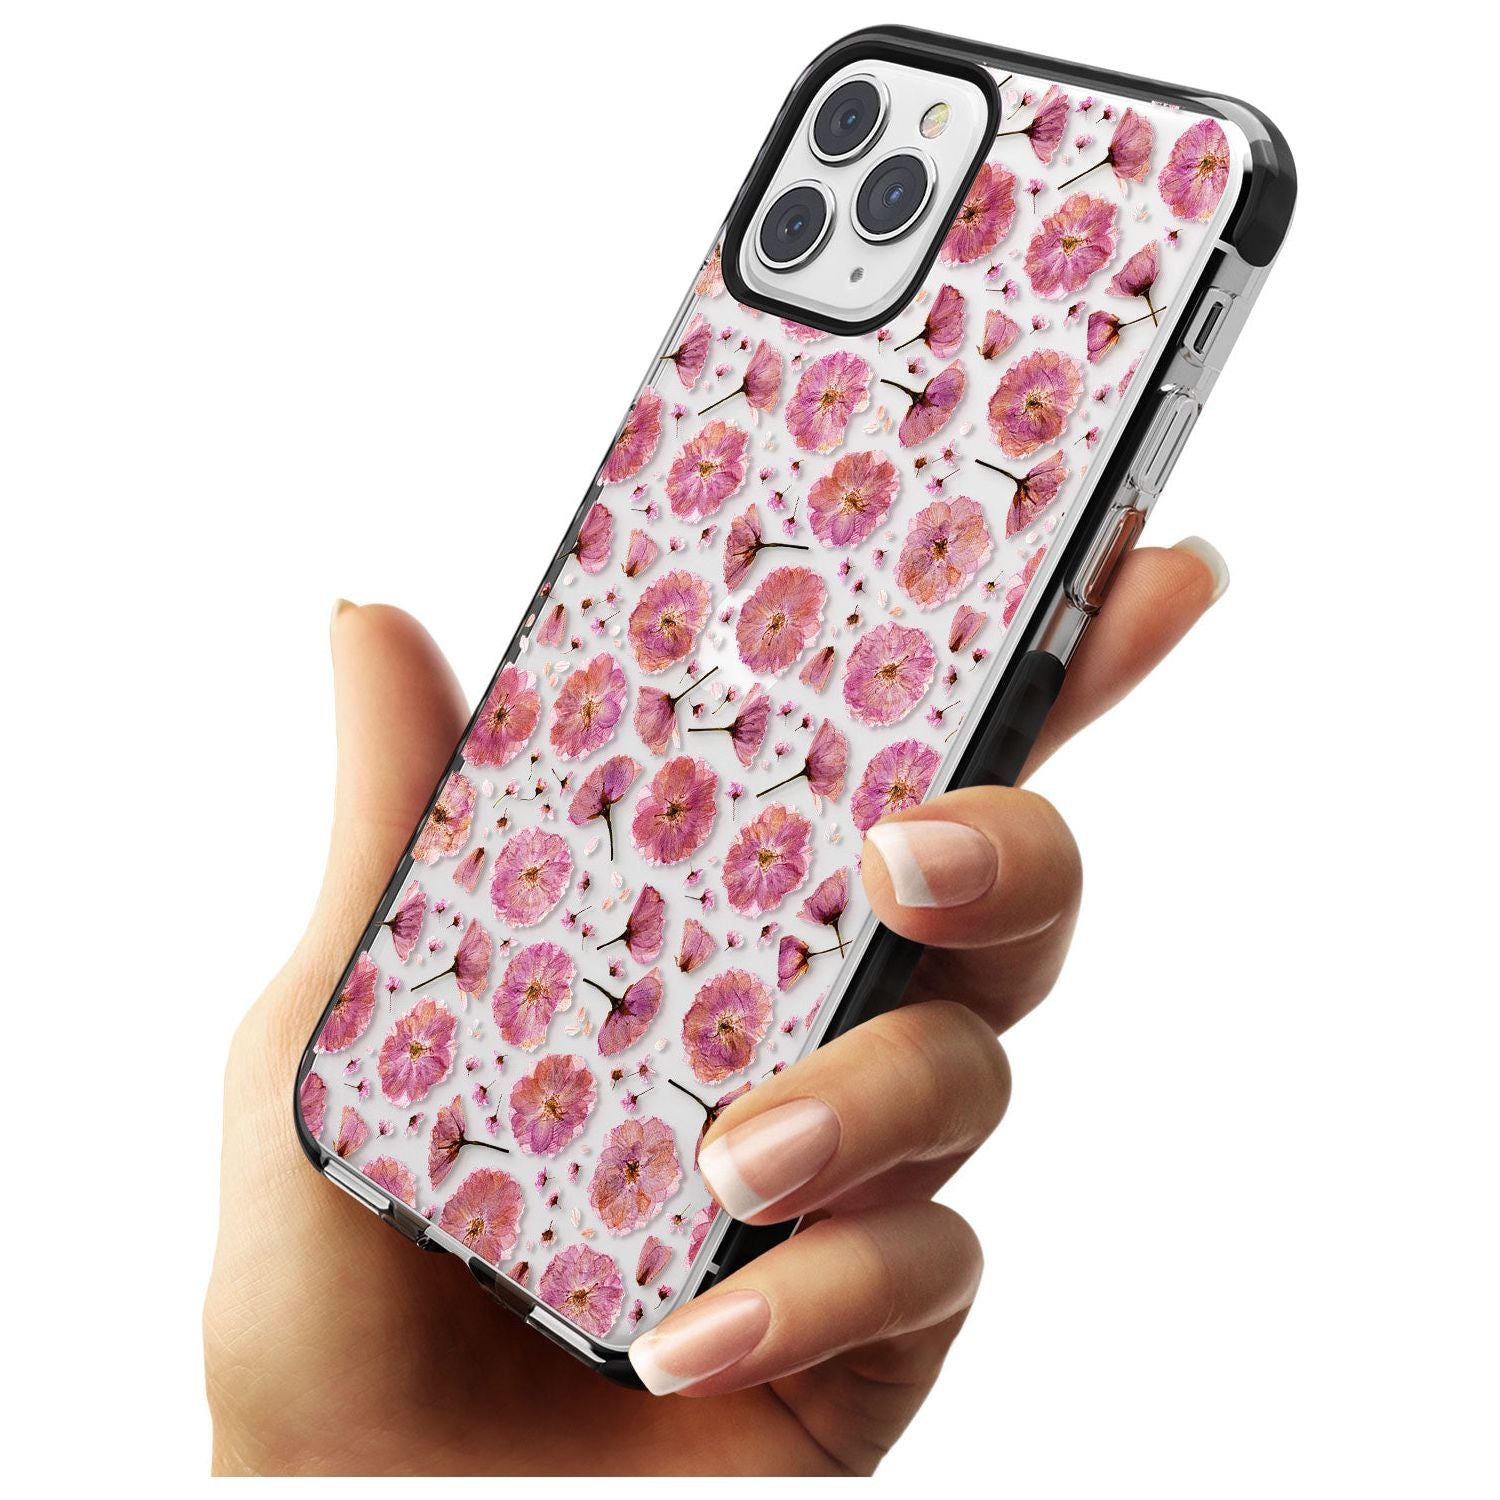 Pink Flowers & Blossoms Transparent Design Black Impact Phone Case for iPhone 11 Pro Max